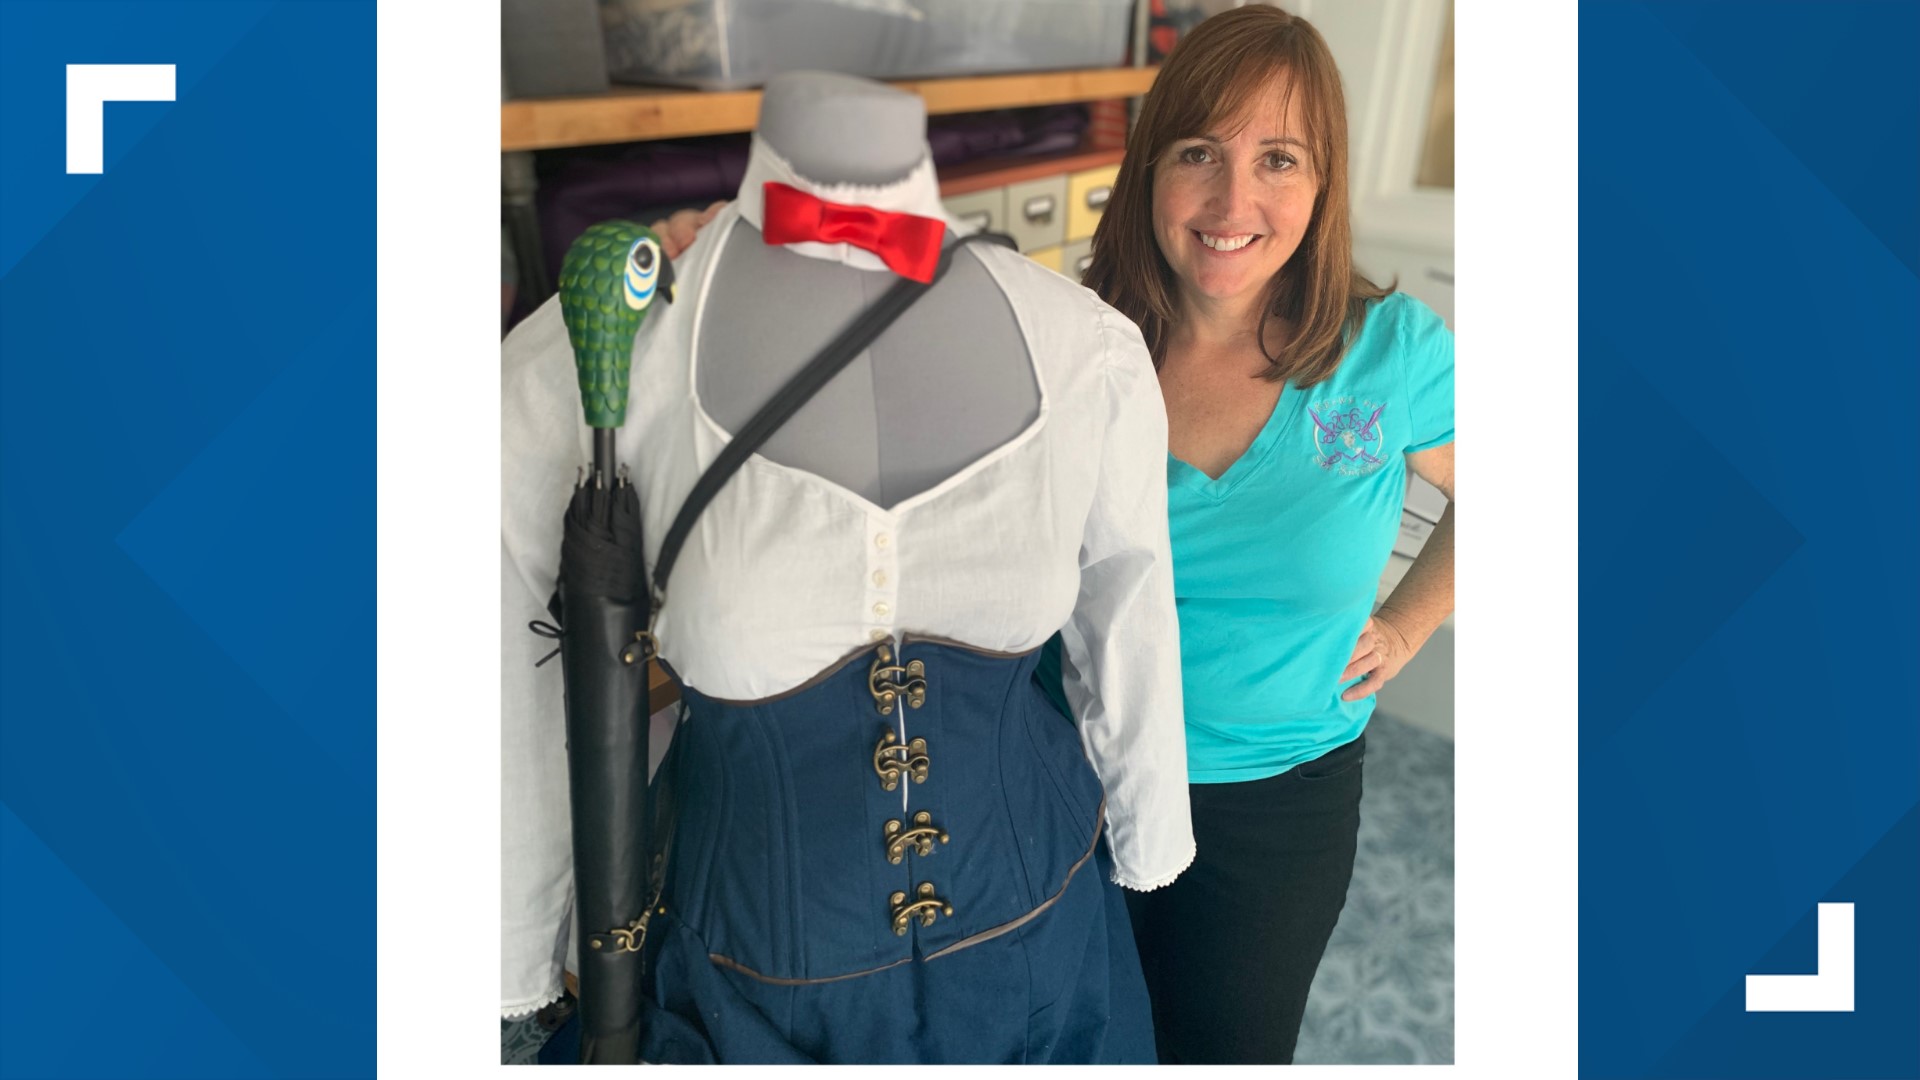 Ellen Abshire is taking her historical costume sewing skills to the next level.